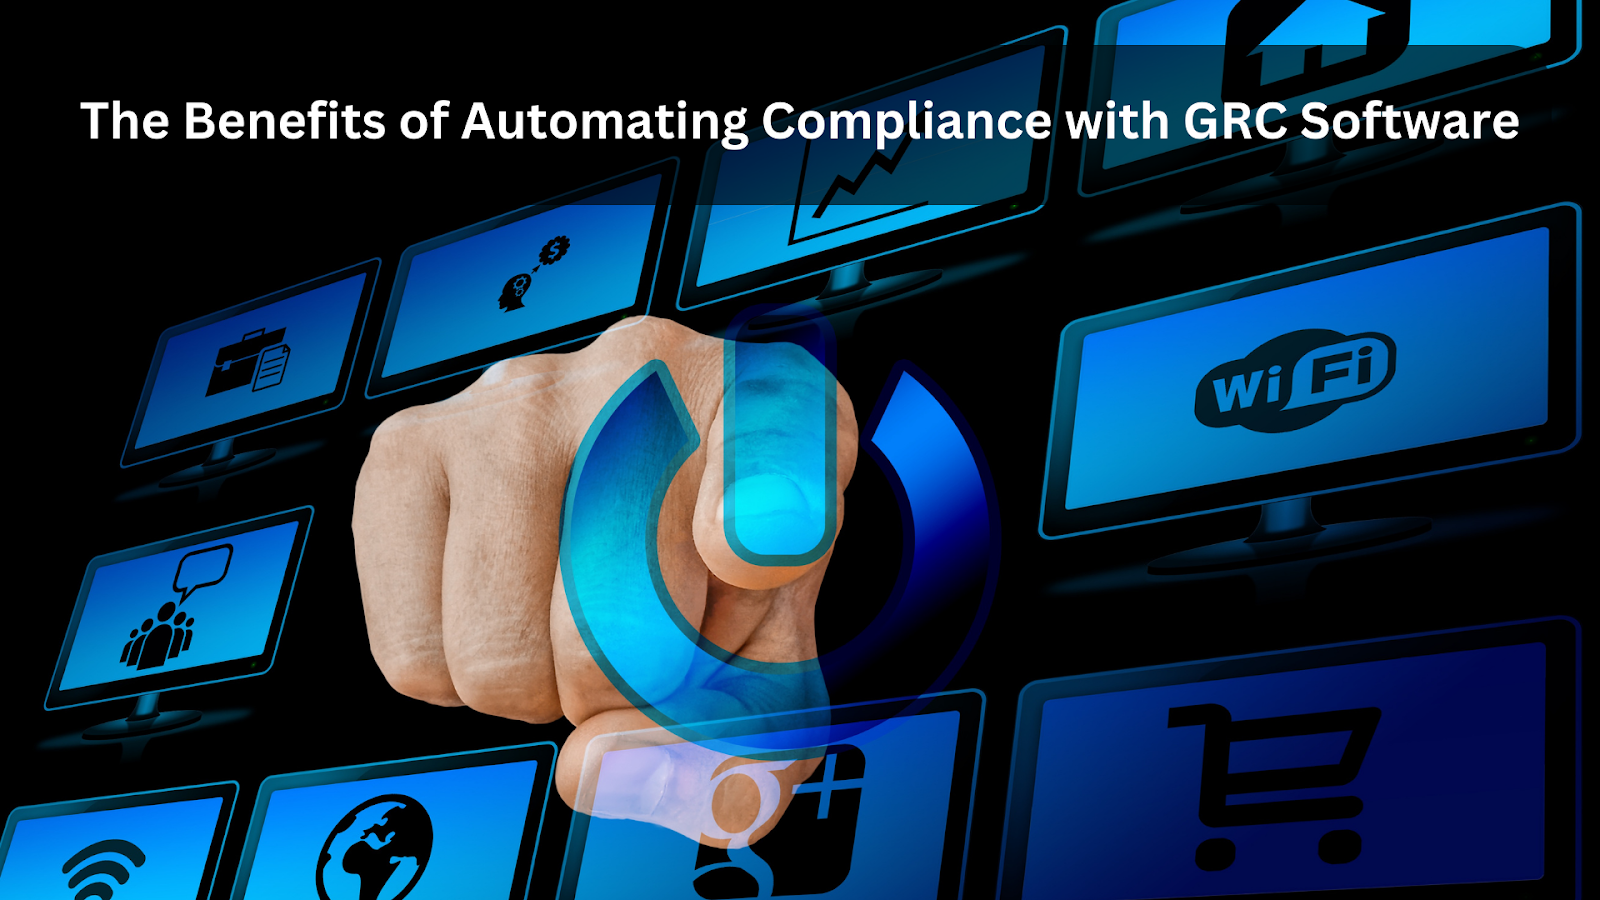 The Benefits of Automating Compliance with GRC Software